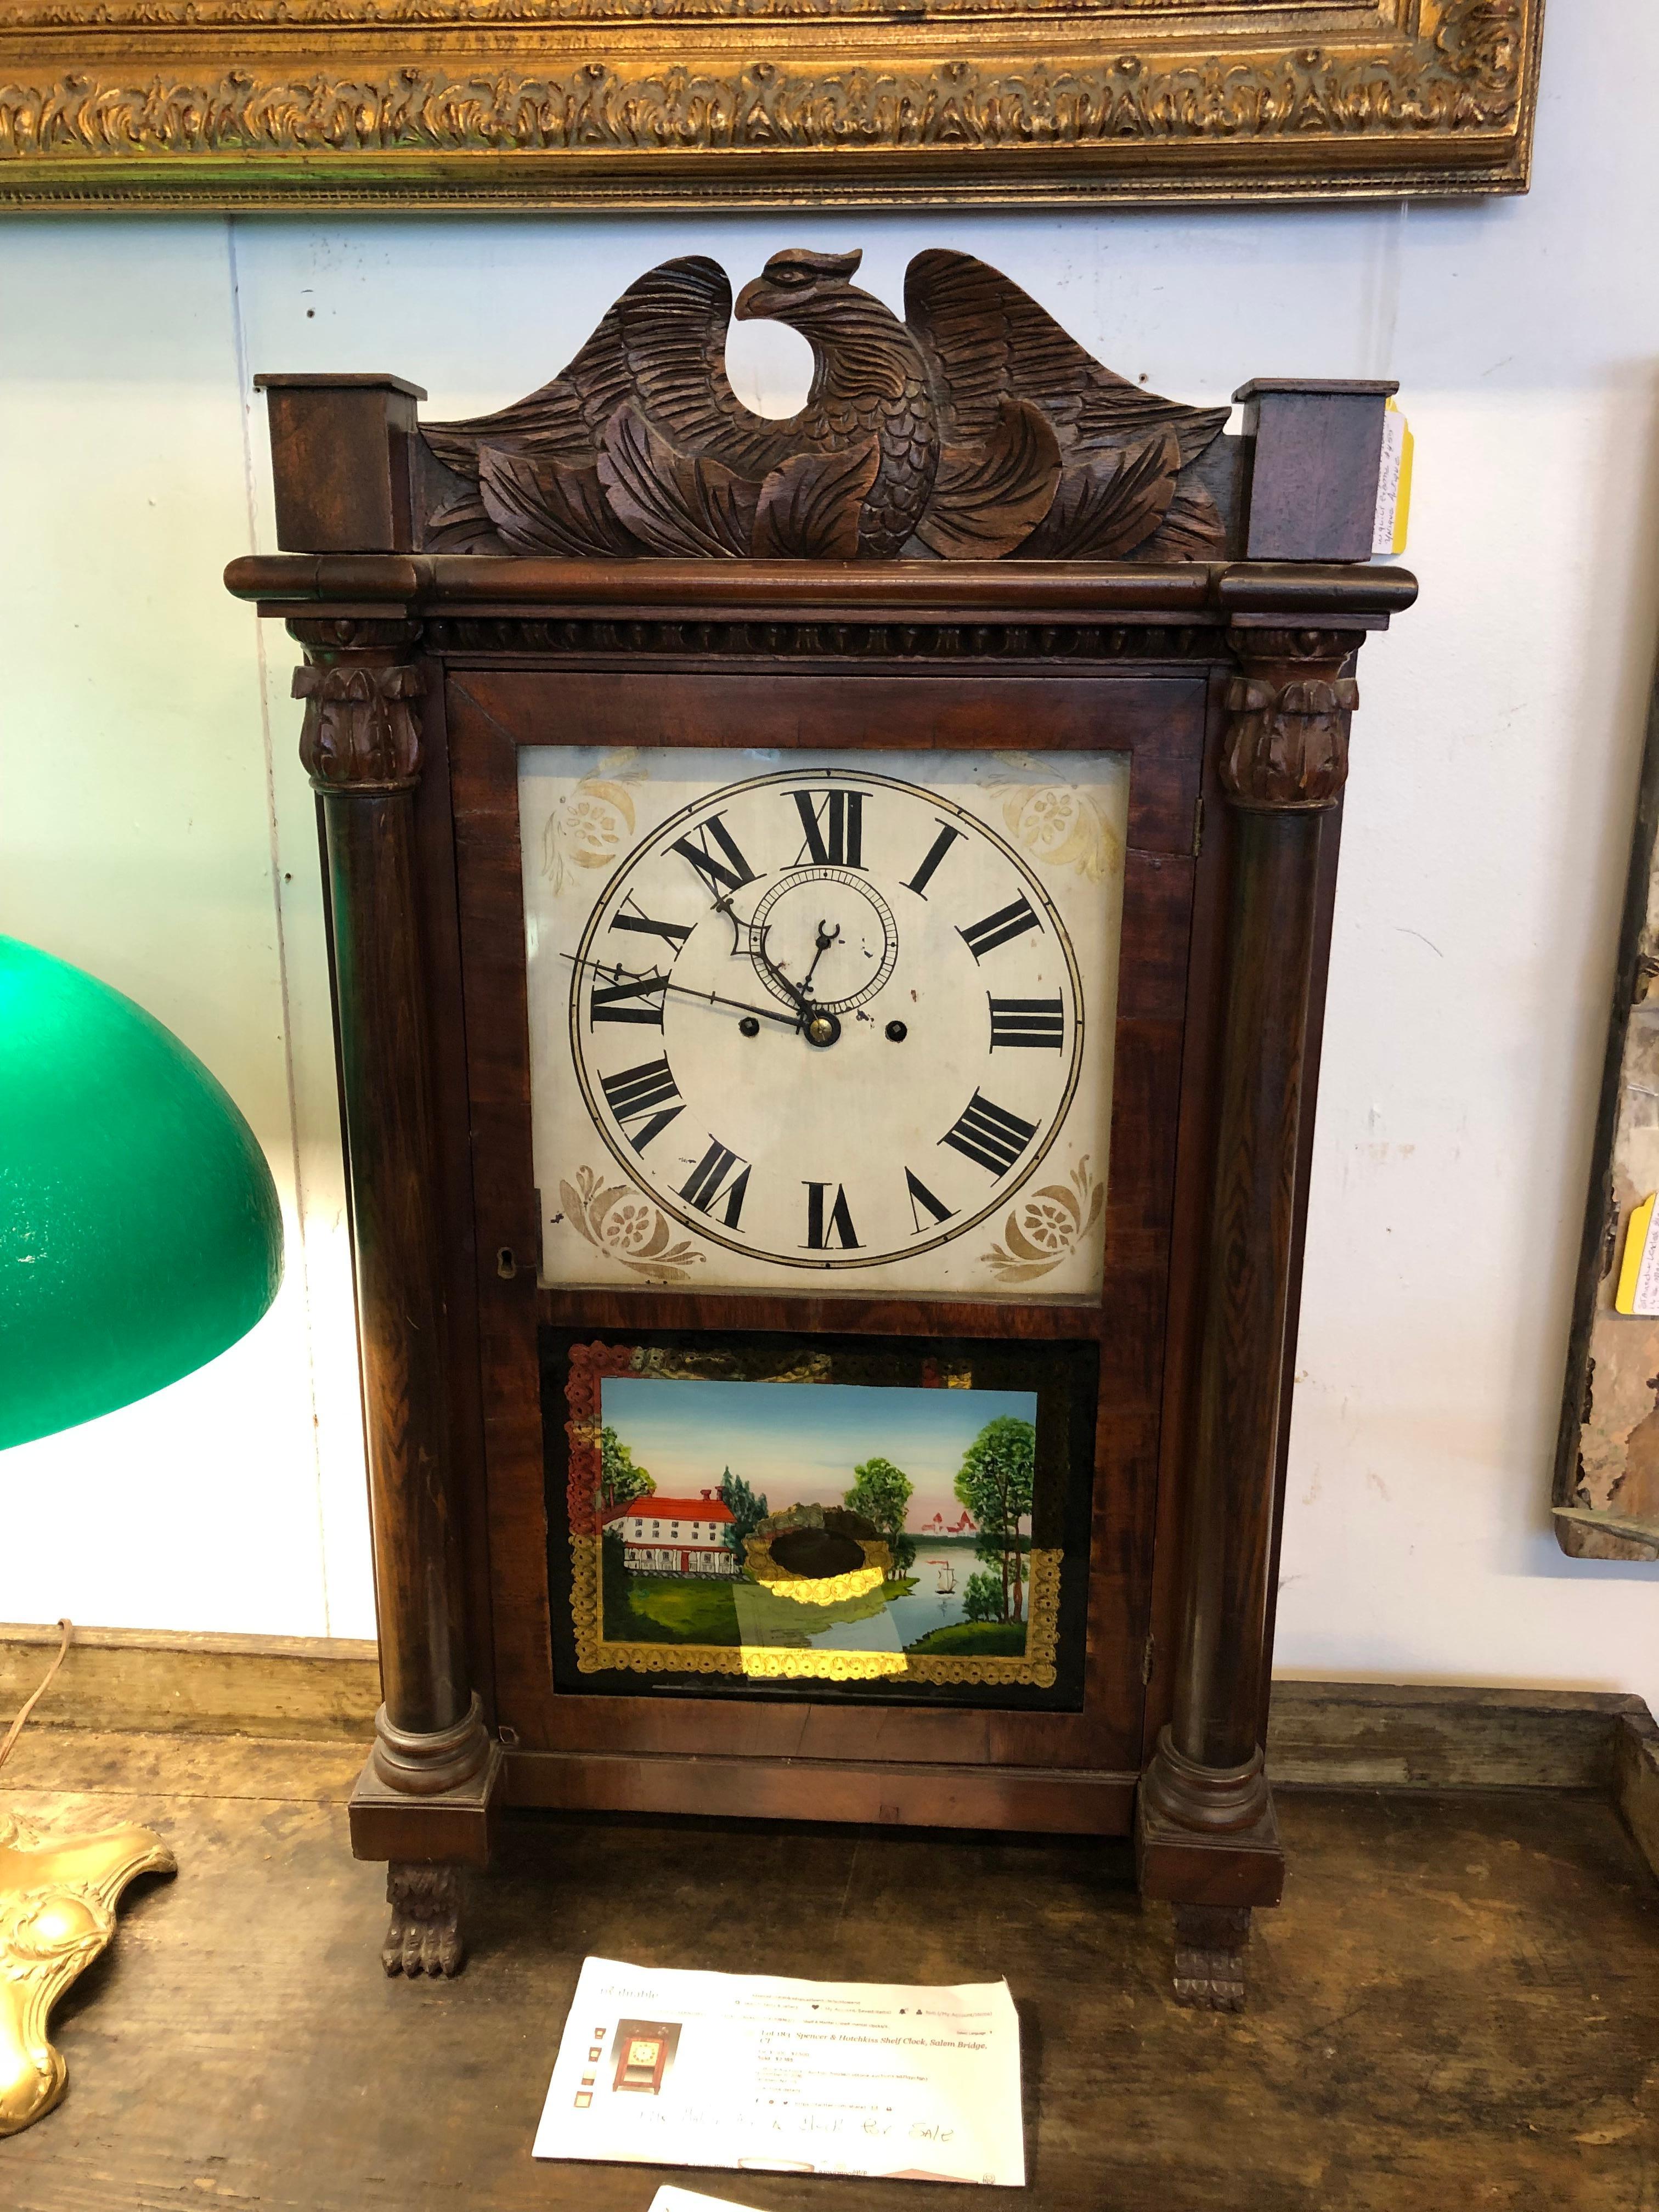 19th century beautiful Salem Bridge shelf clock having 8 day time and bell strike on the hour with second hand indicator.  Brass works, dpendable timekeeper.  Gorgeous carved wood with eagle at the top, columns on each side terminating in claw feet.